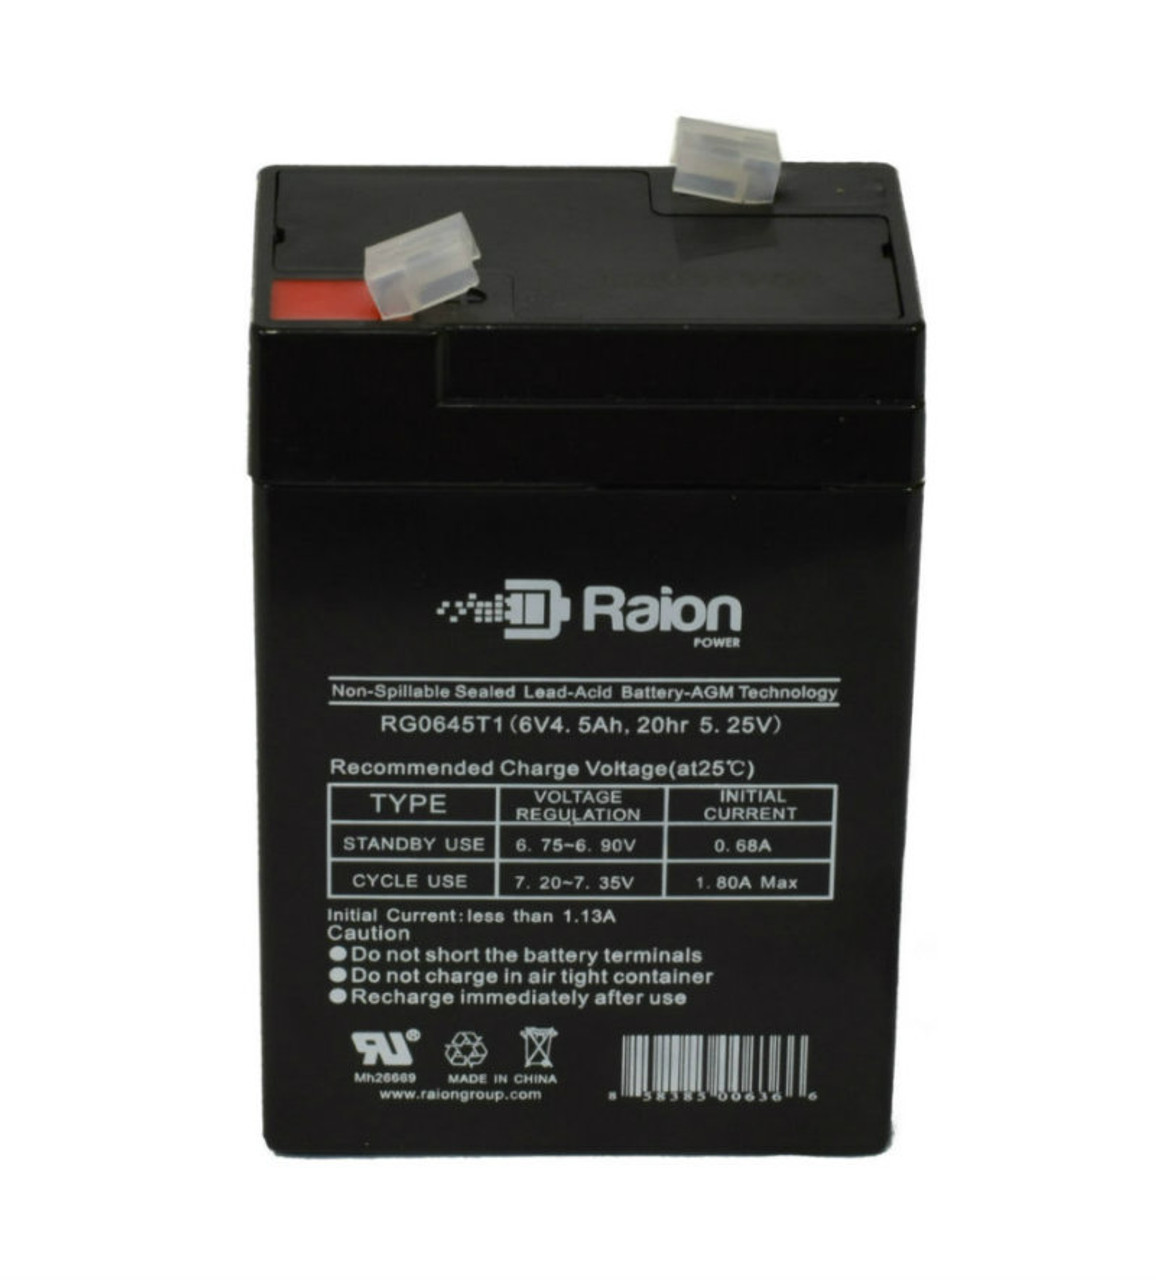 Raion Power RG0645T1 Replacement Battery Cartridge for Europower EP 4.5-6